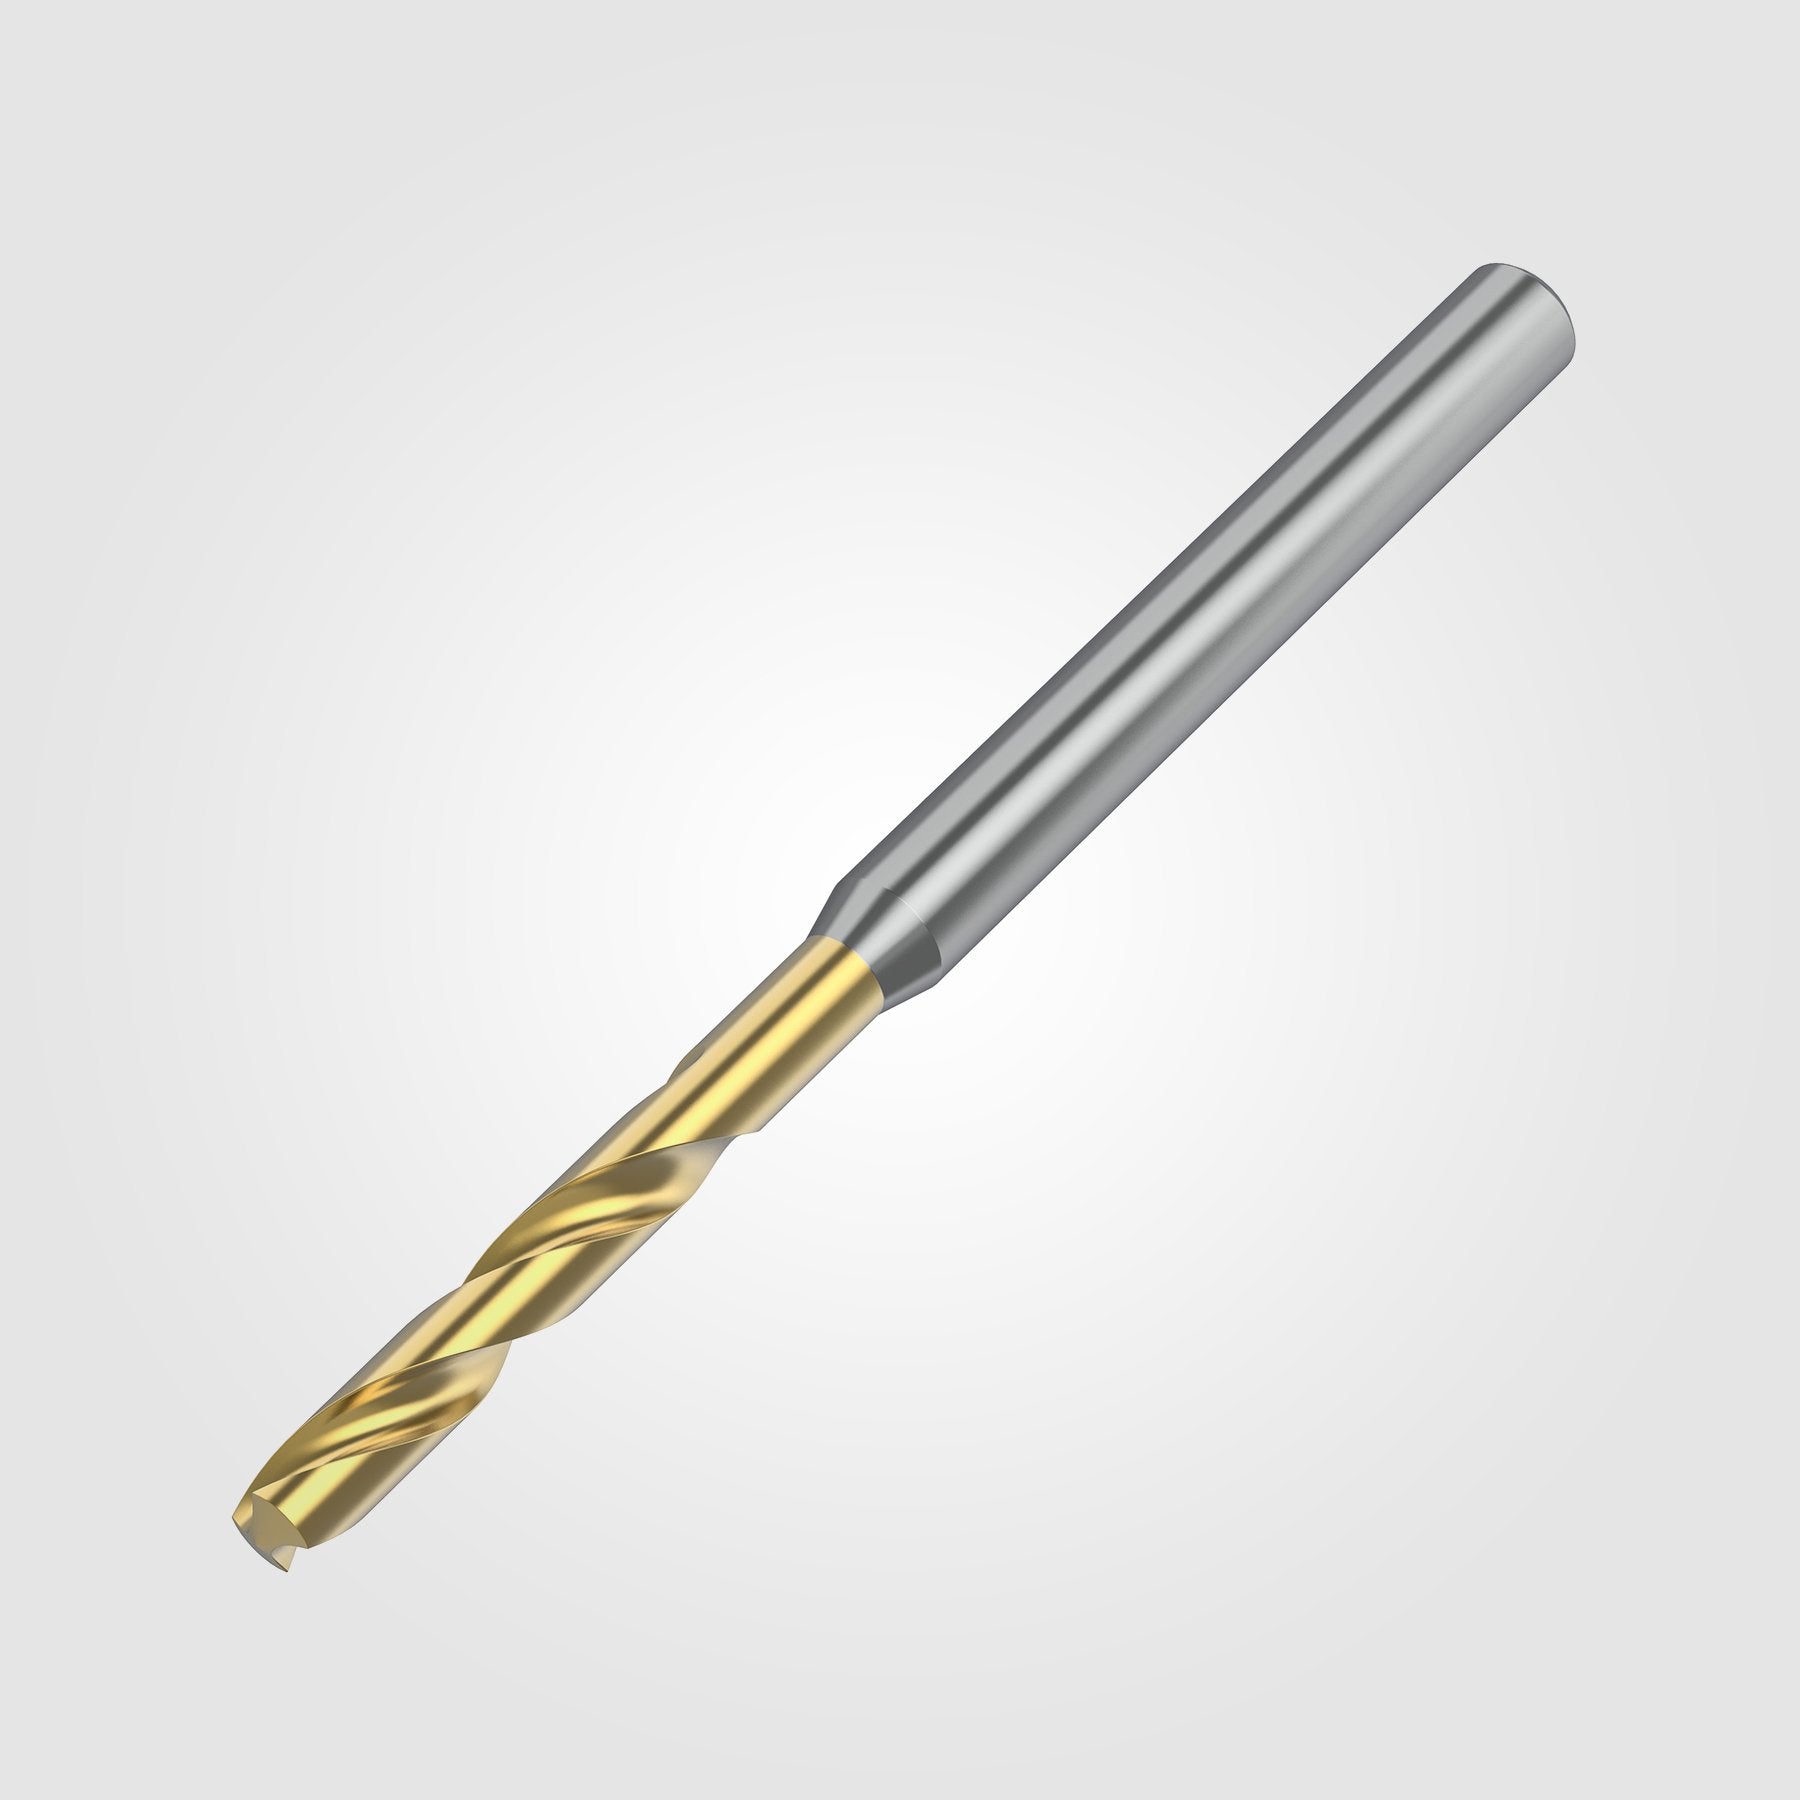 GOdrill (THROUGH COOLANT) | 9.1mm / .3583" / 3xD | SOLID CARBIDE DRILL | 4151189